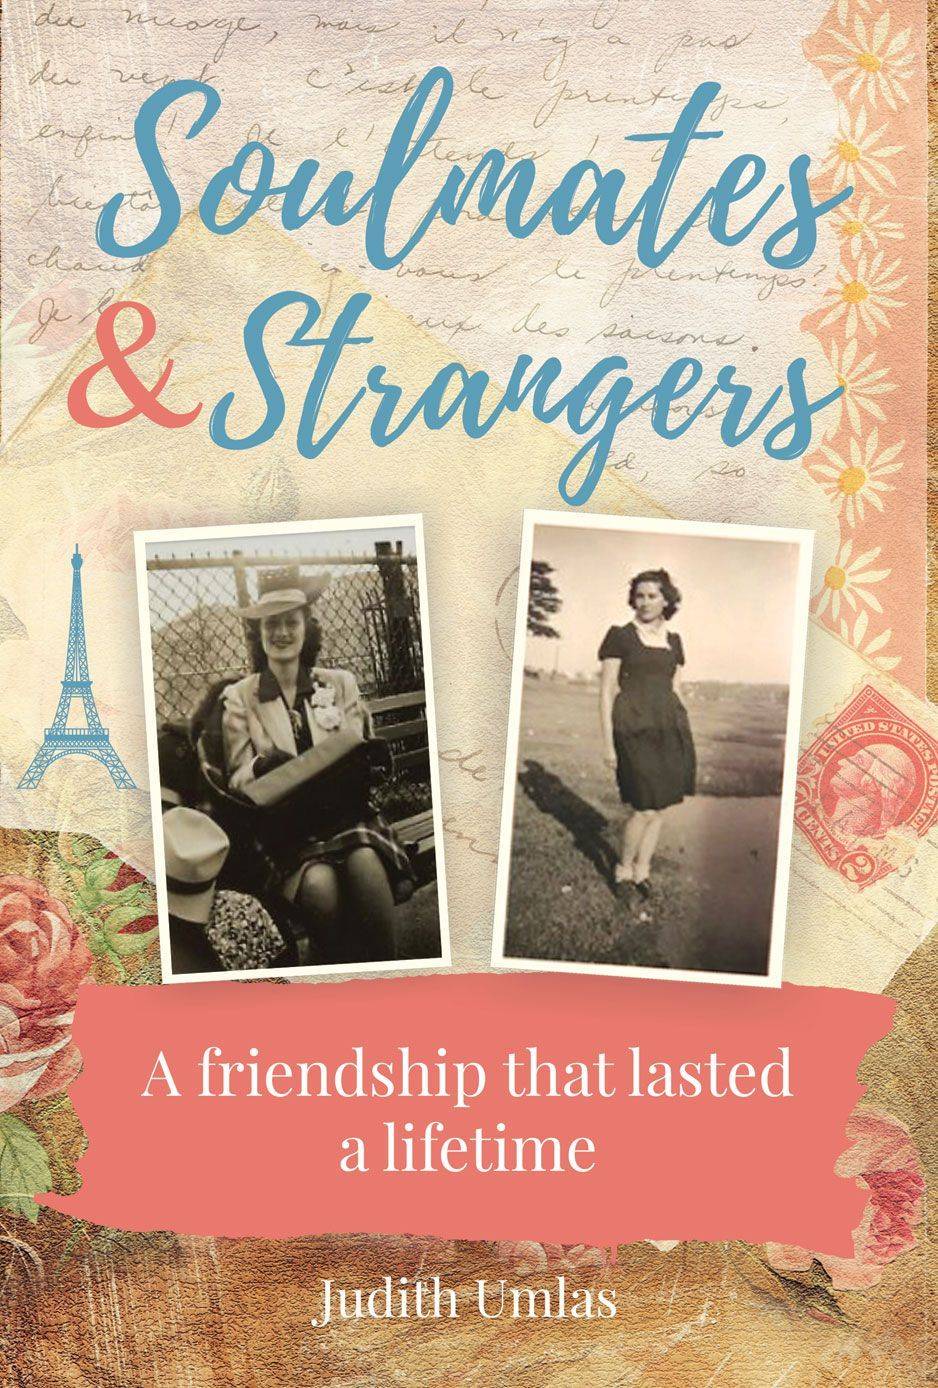 book cover with the title: Soulmates and Strangers by Judith Umlas and has two black and white photos of young women 